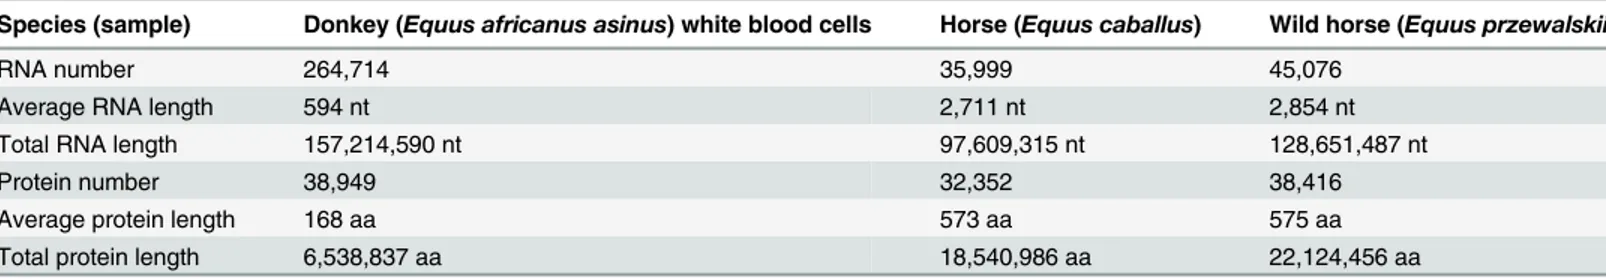 Table 1. Summary of the RNA/protein numbers and lengths of donkey white blood cells, horse, and wild horse.